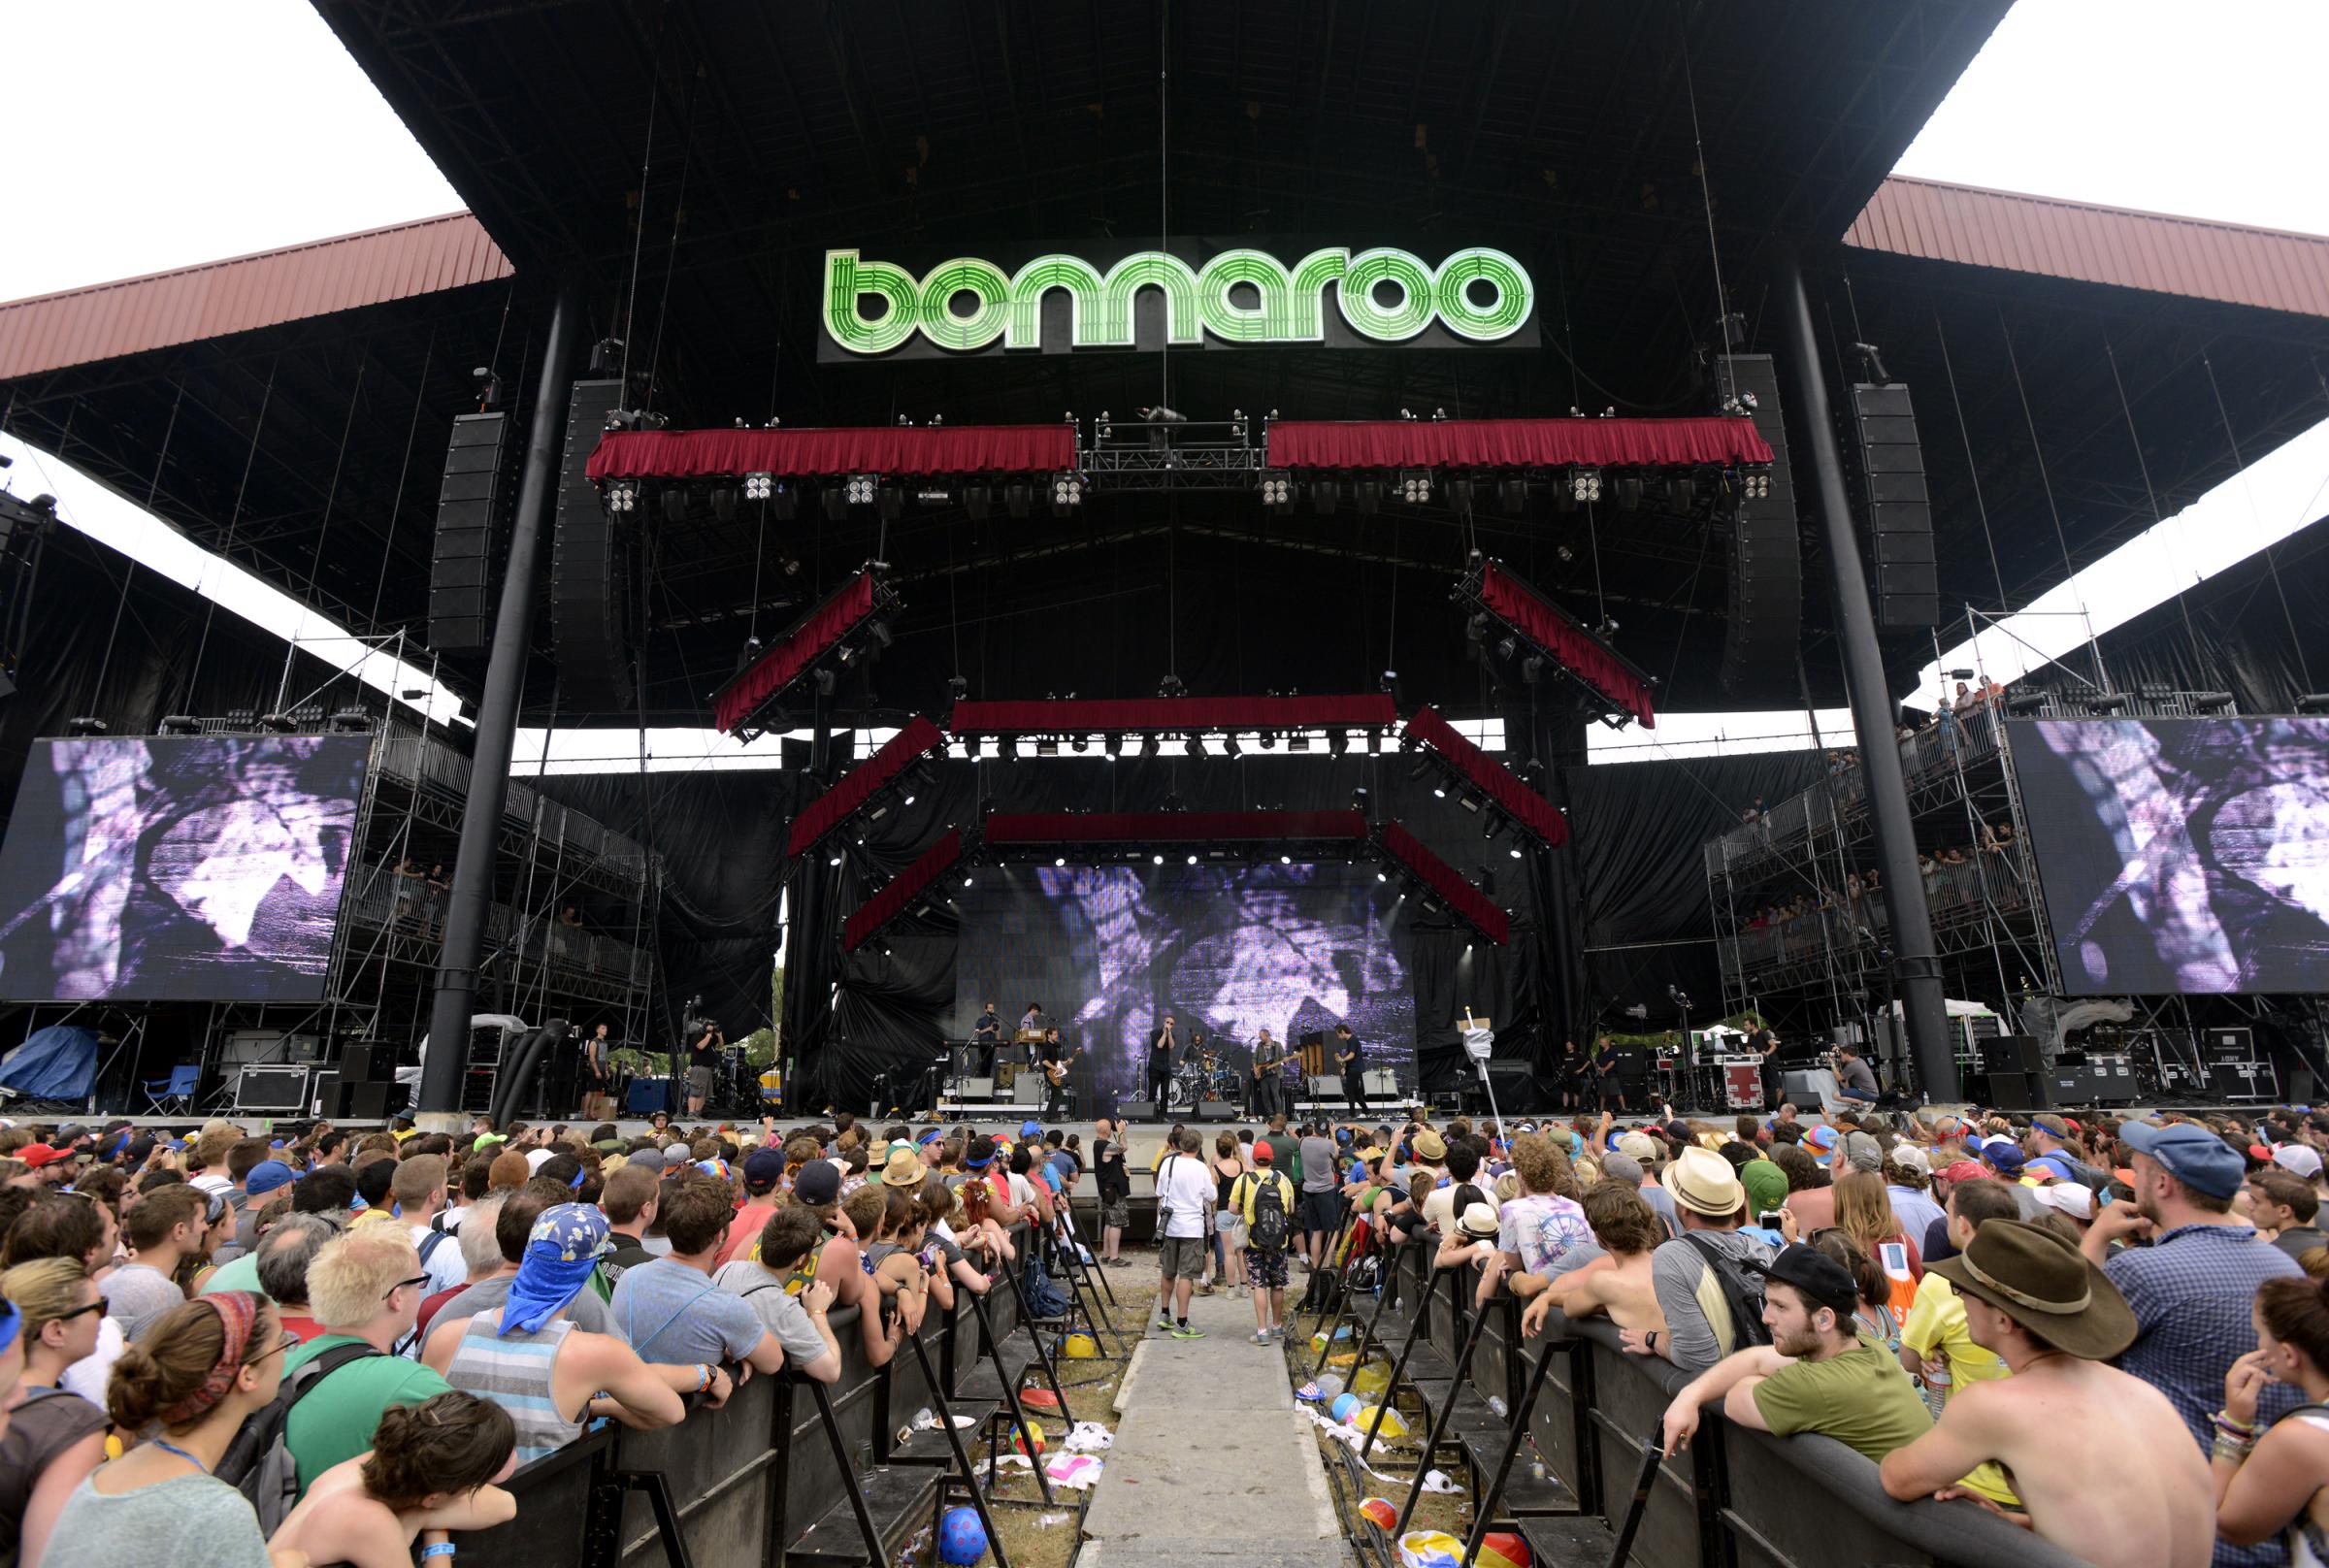 2013 Bonnaroo Music And Arts Festival - Day 4